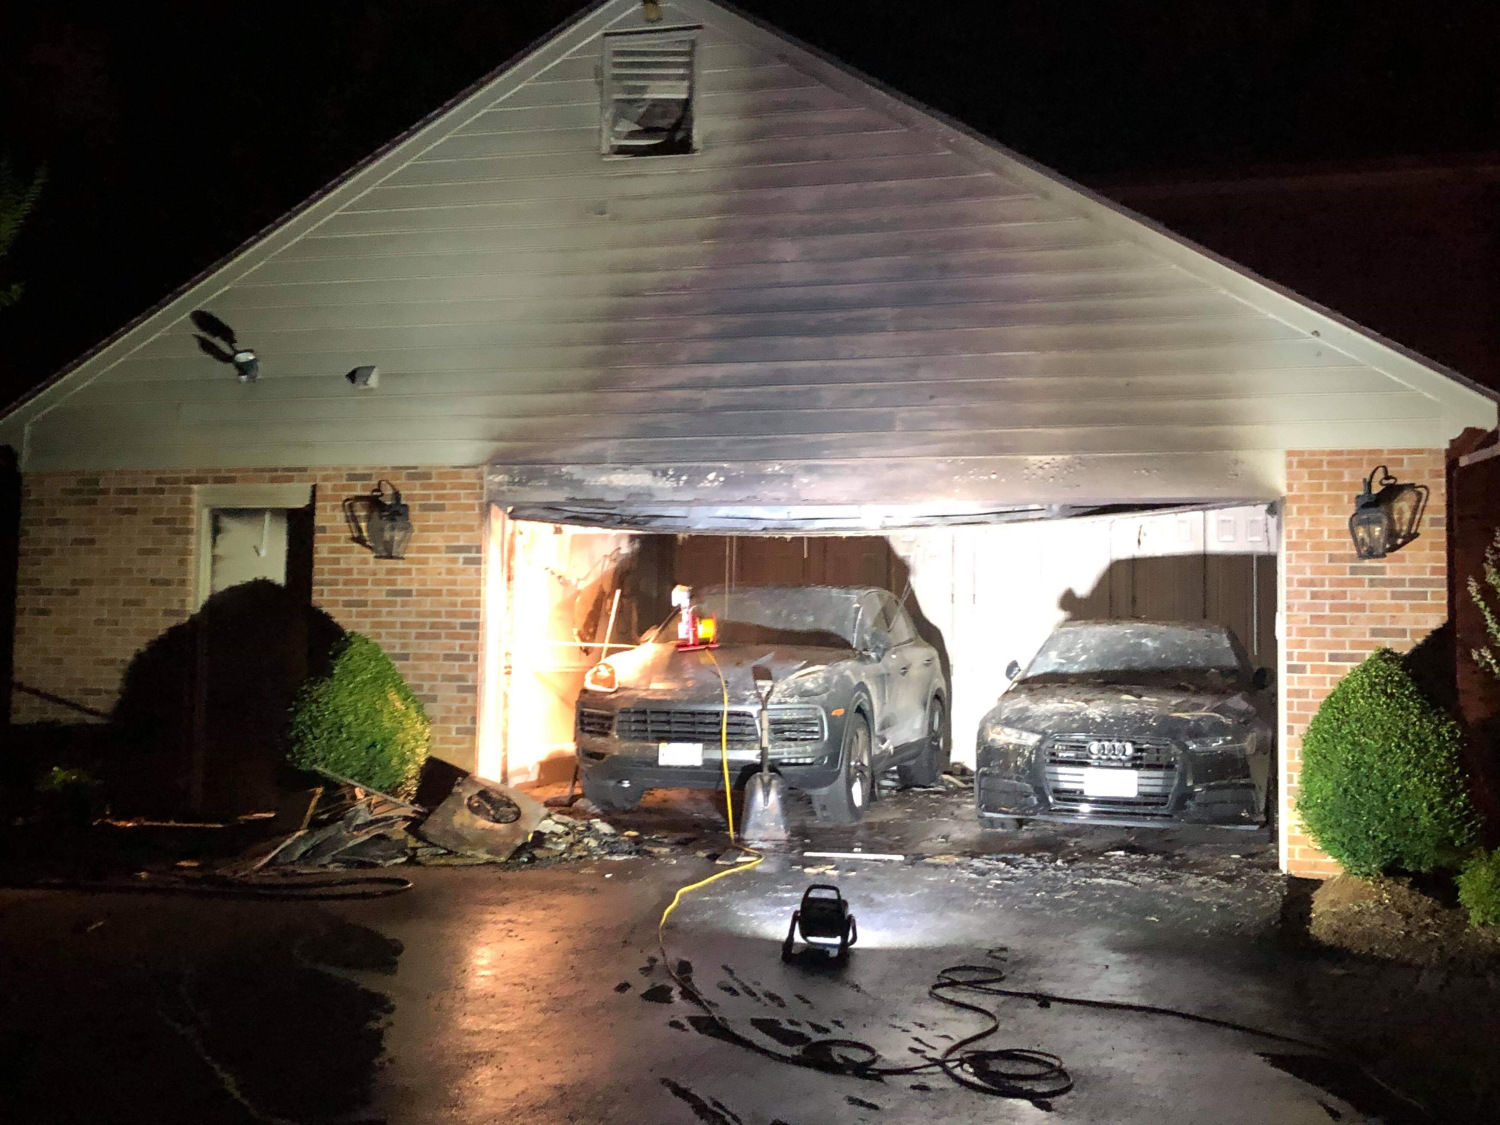 Sparklers thrown in the trash caused a house fire in Fairfax County, Virginia, the resulted in $11,000 in damages. (Courtesy Fairfax County Fire and Rescue)